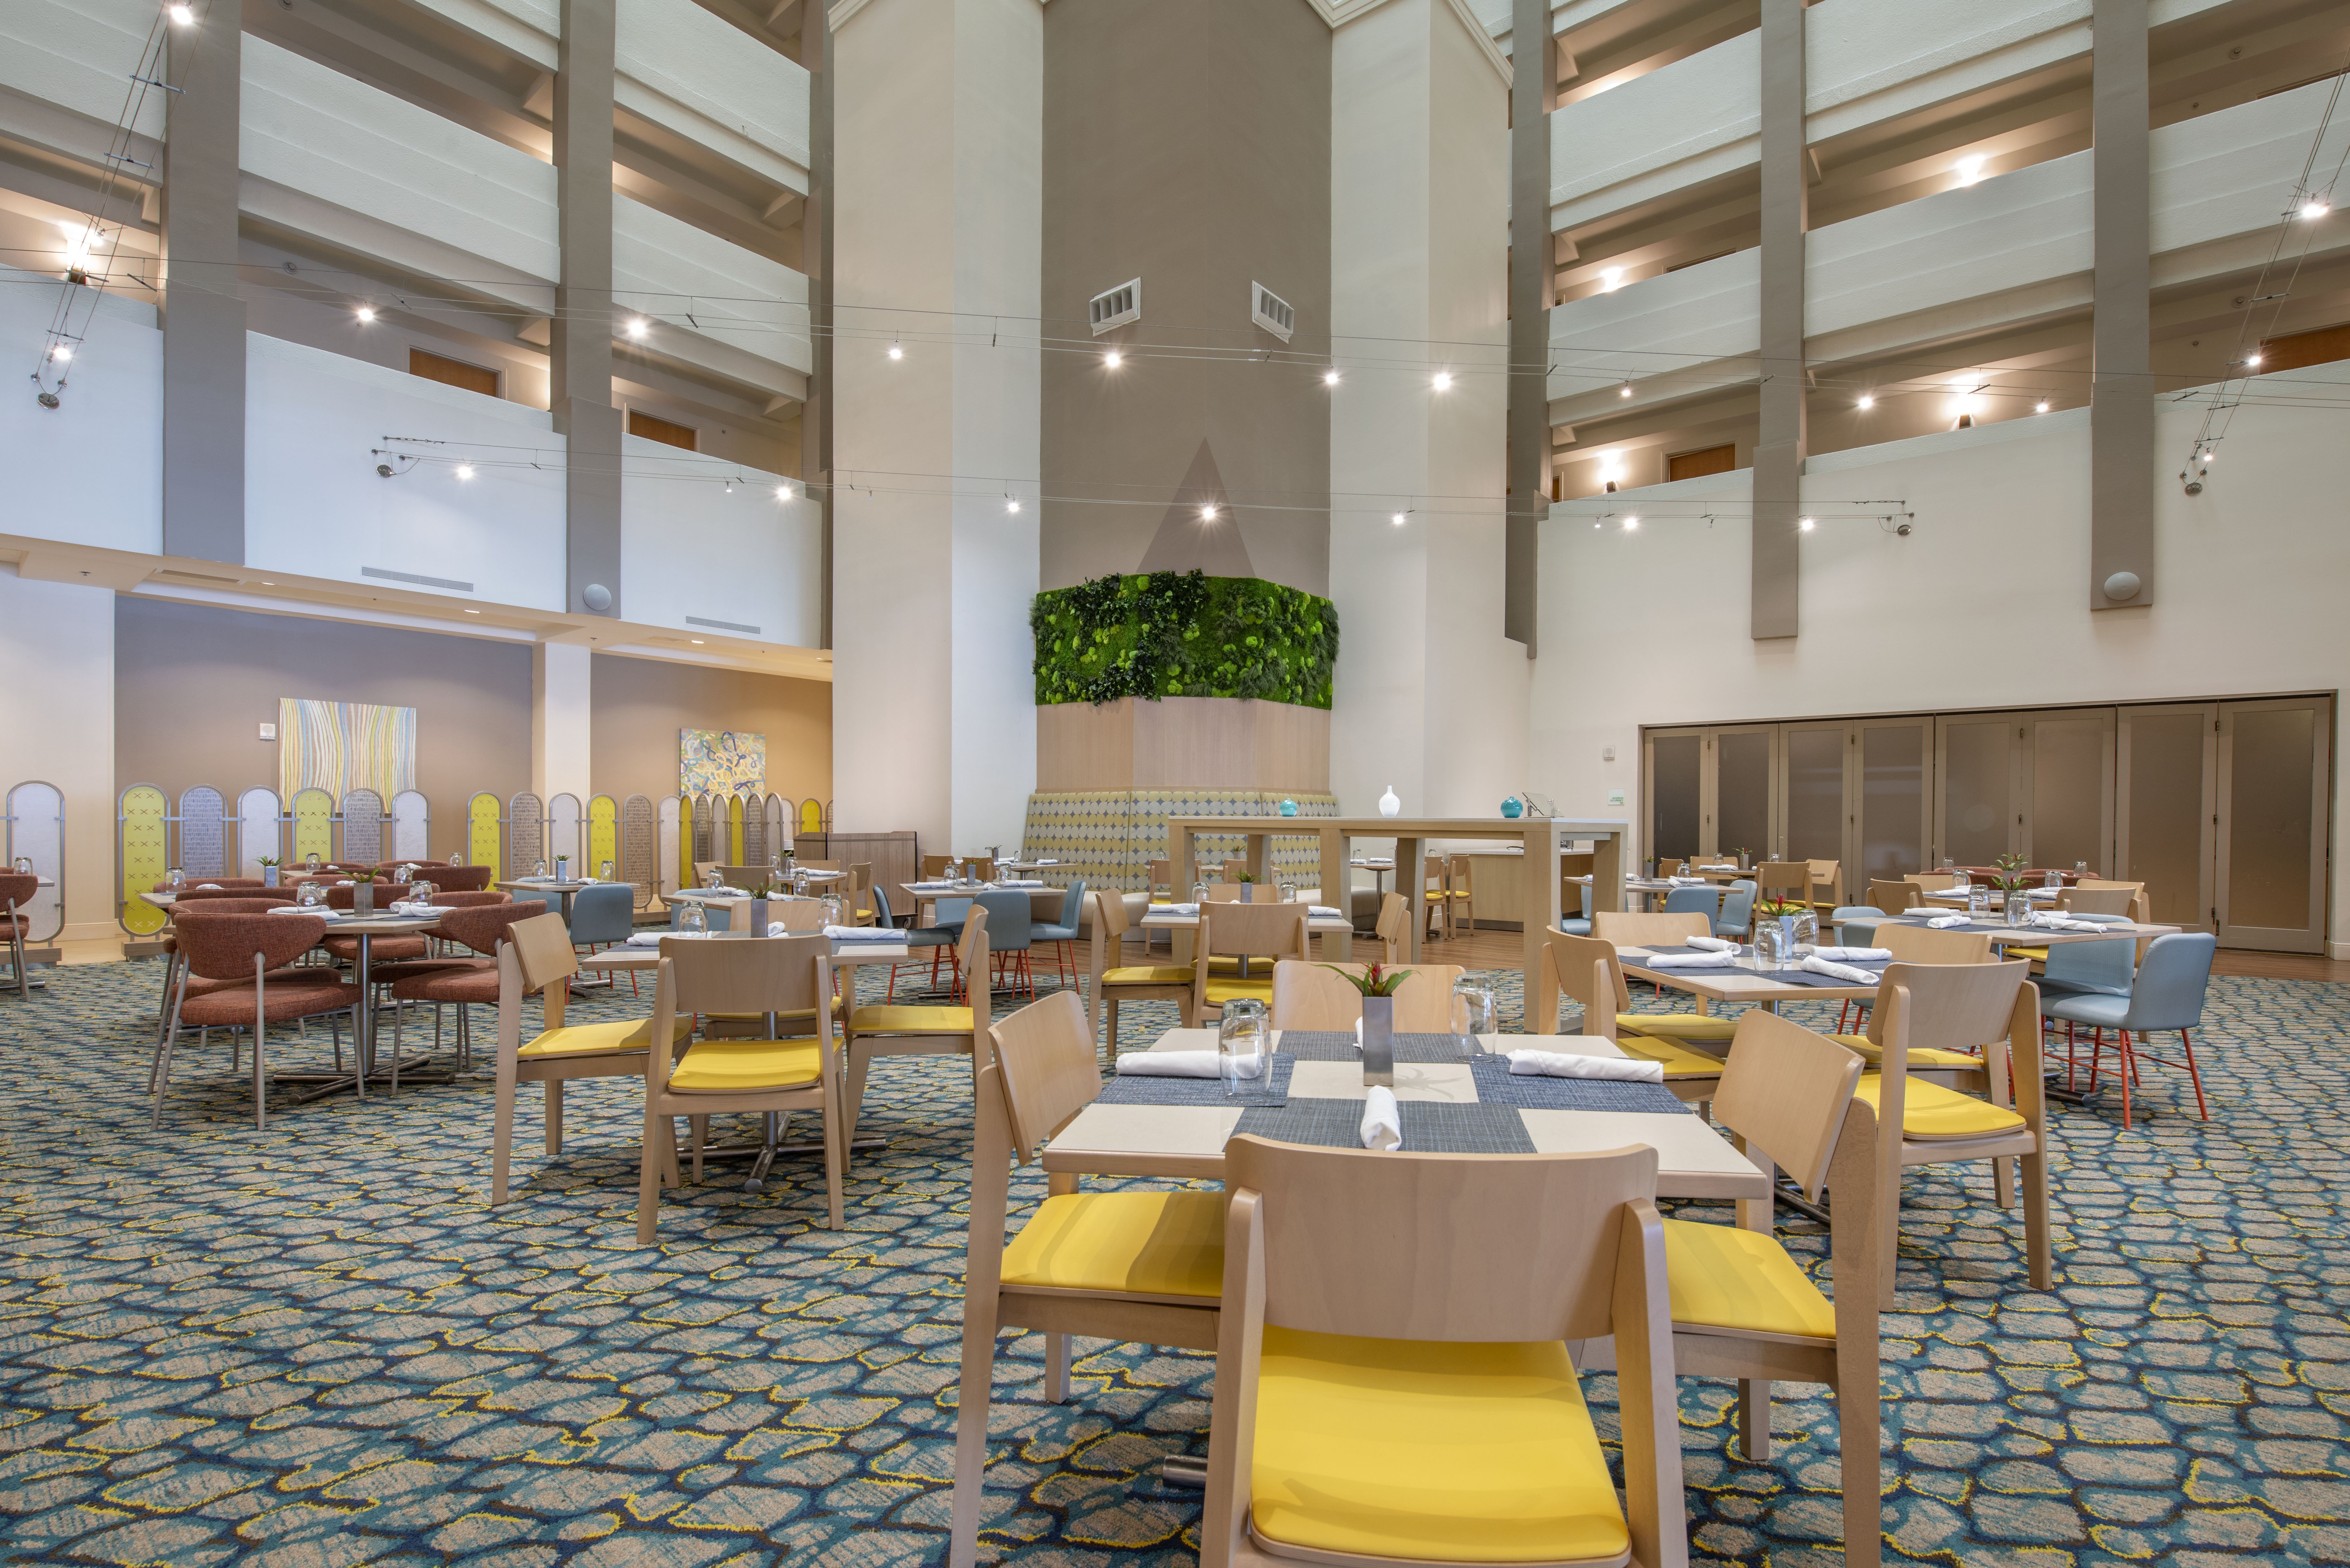 Inquire about Dining Options at Our Hotel Near Disney.